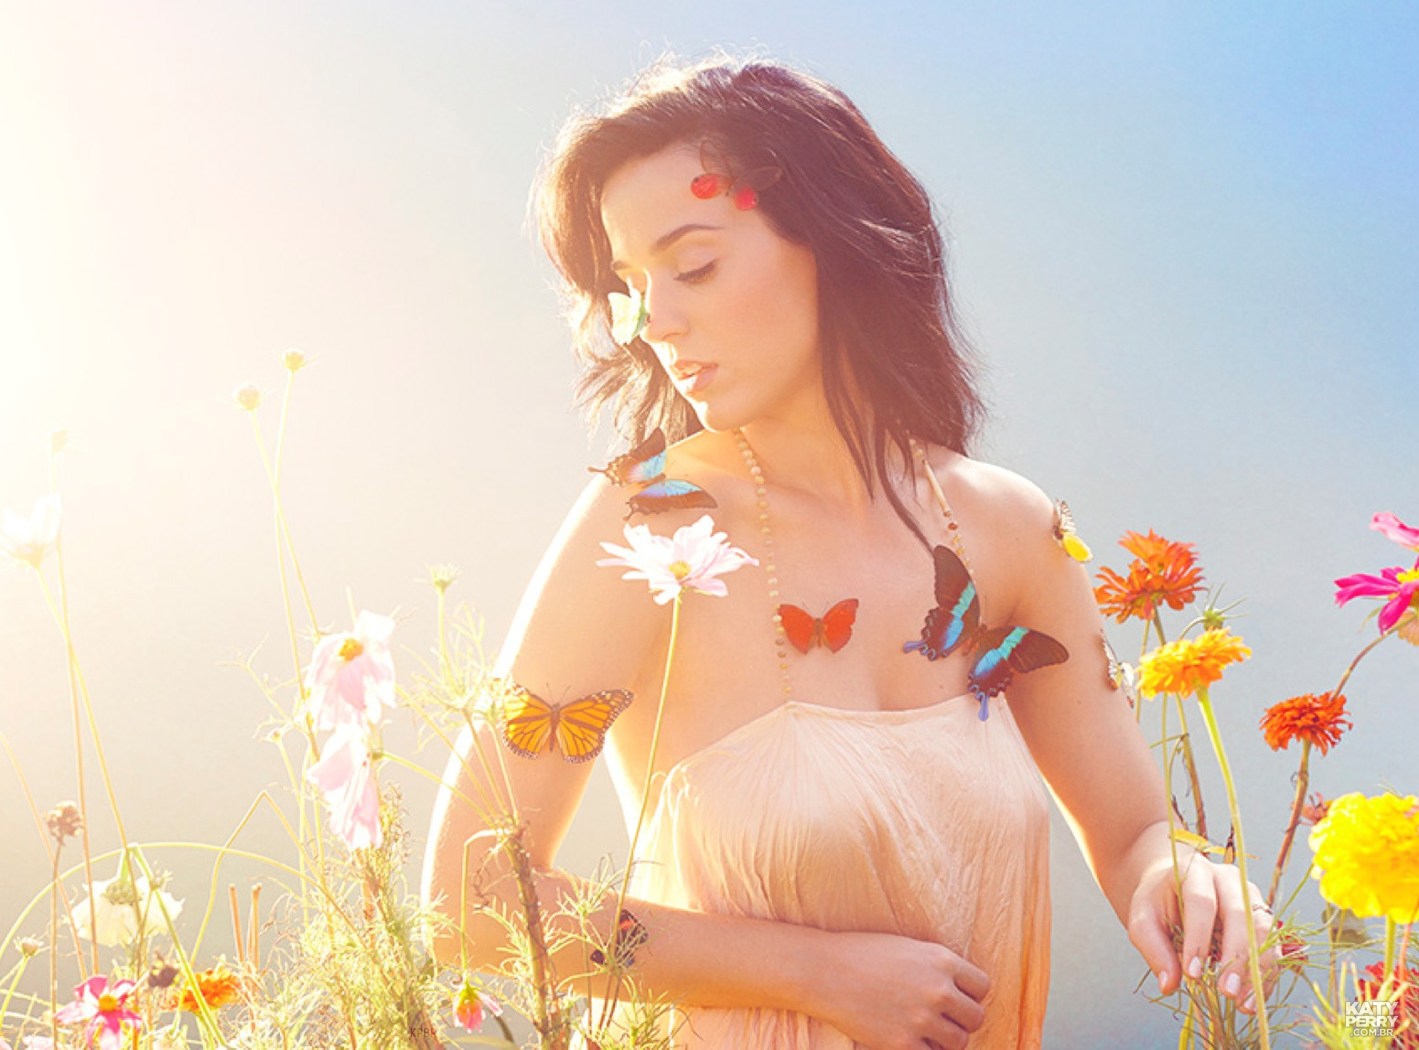 Katy Perry Prism high quality promo photo new CD insert image 6